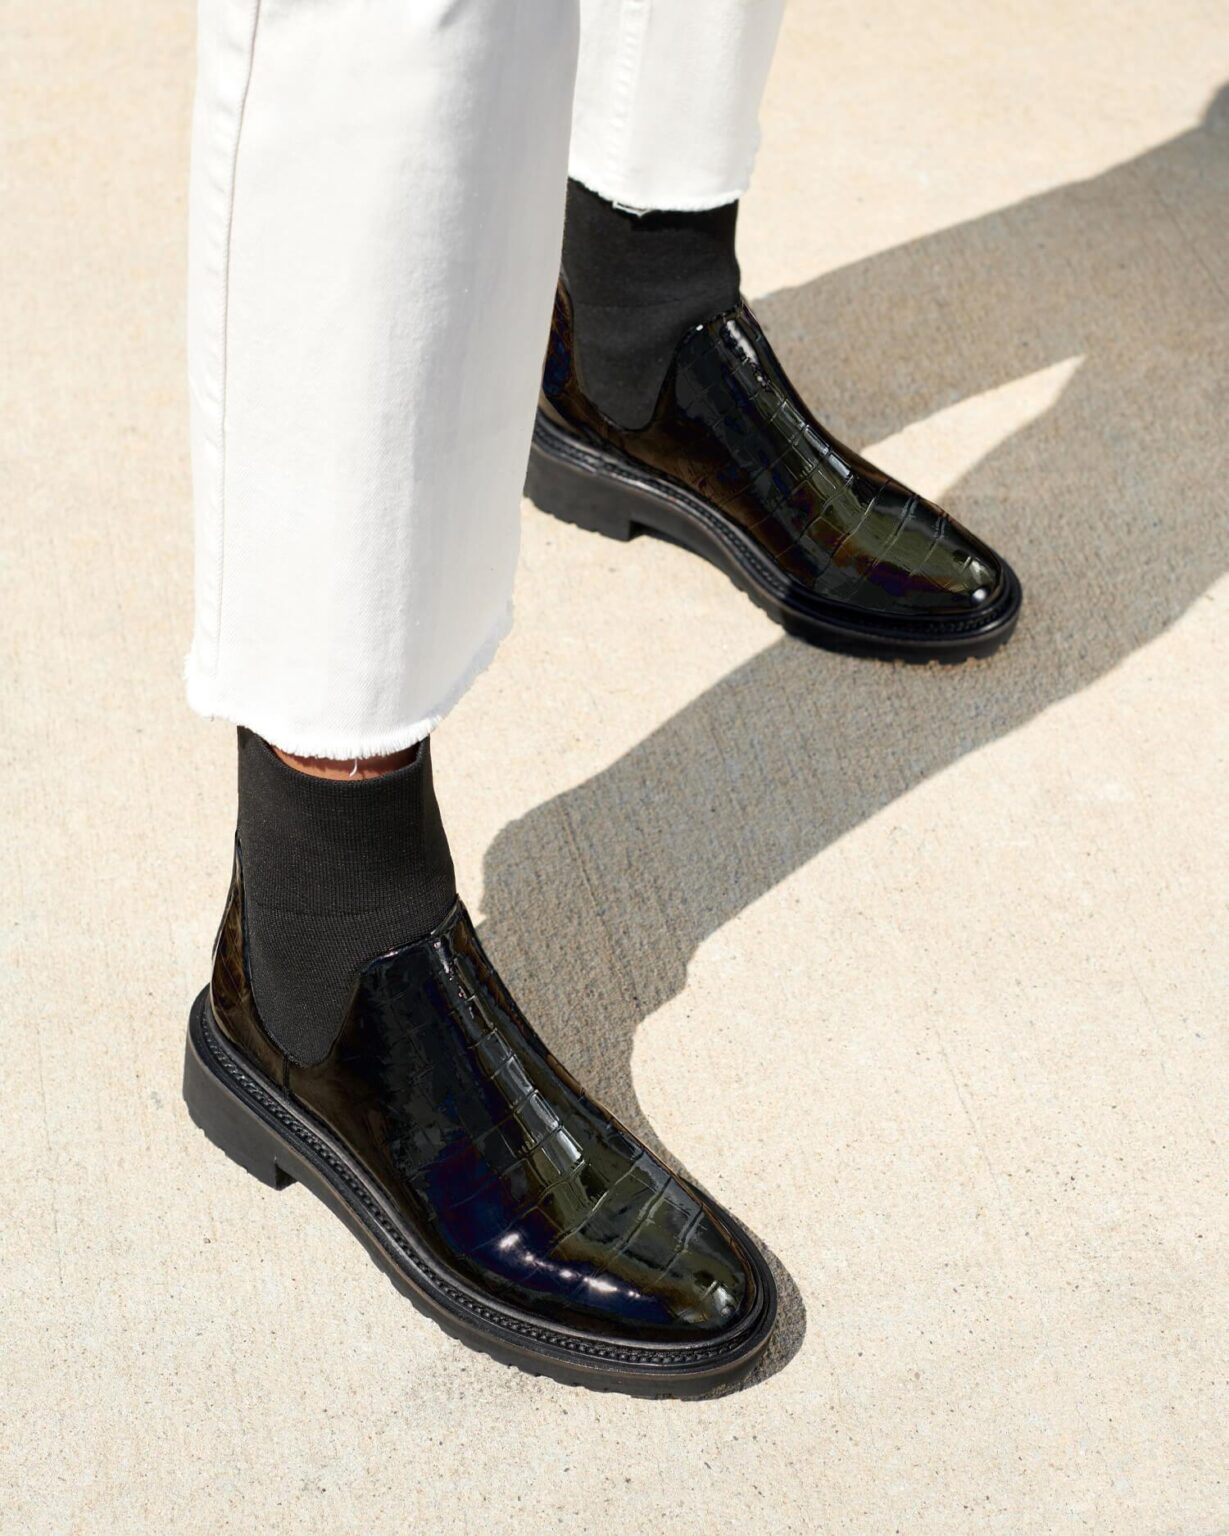 These are the Best Prada Boot Dupes You Can Buy Right Now